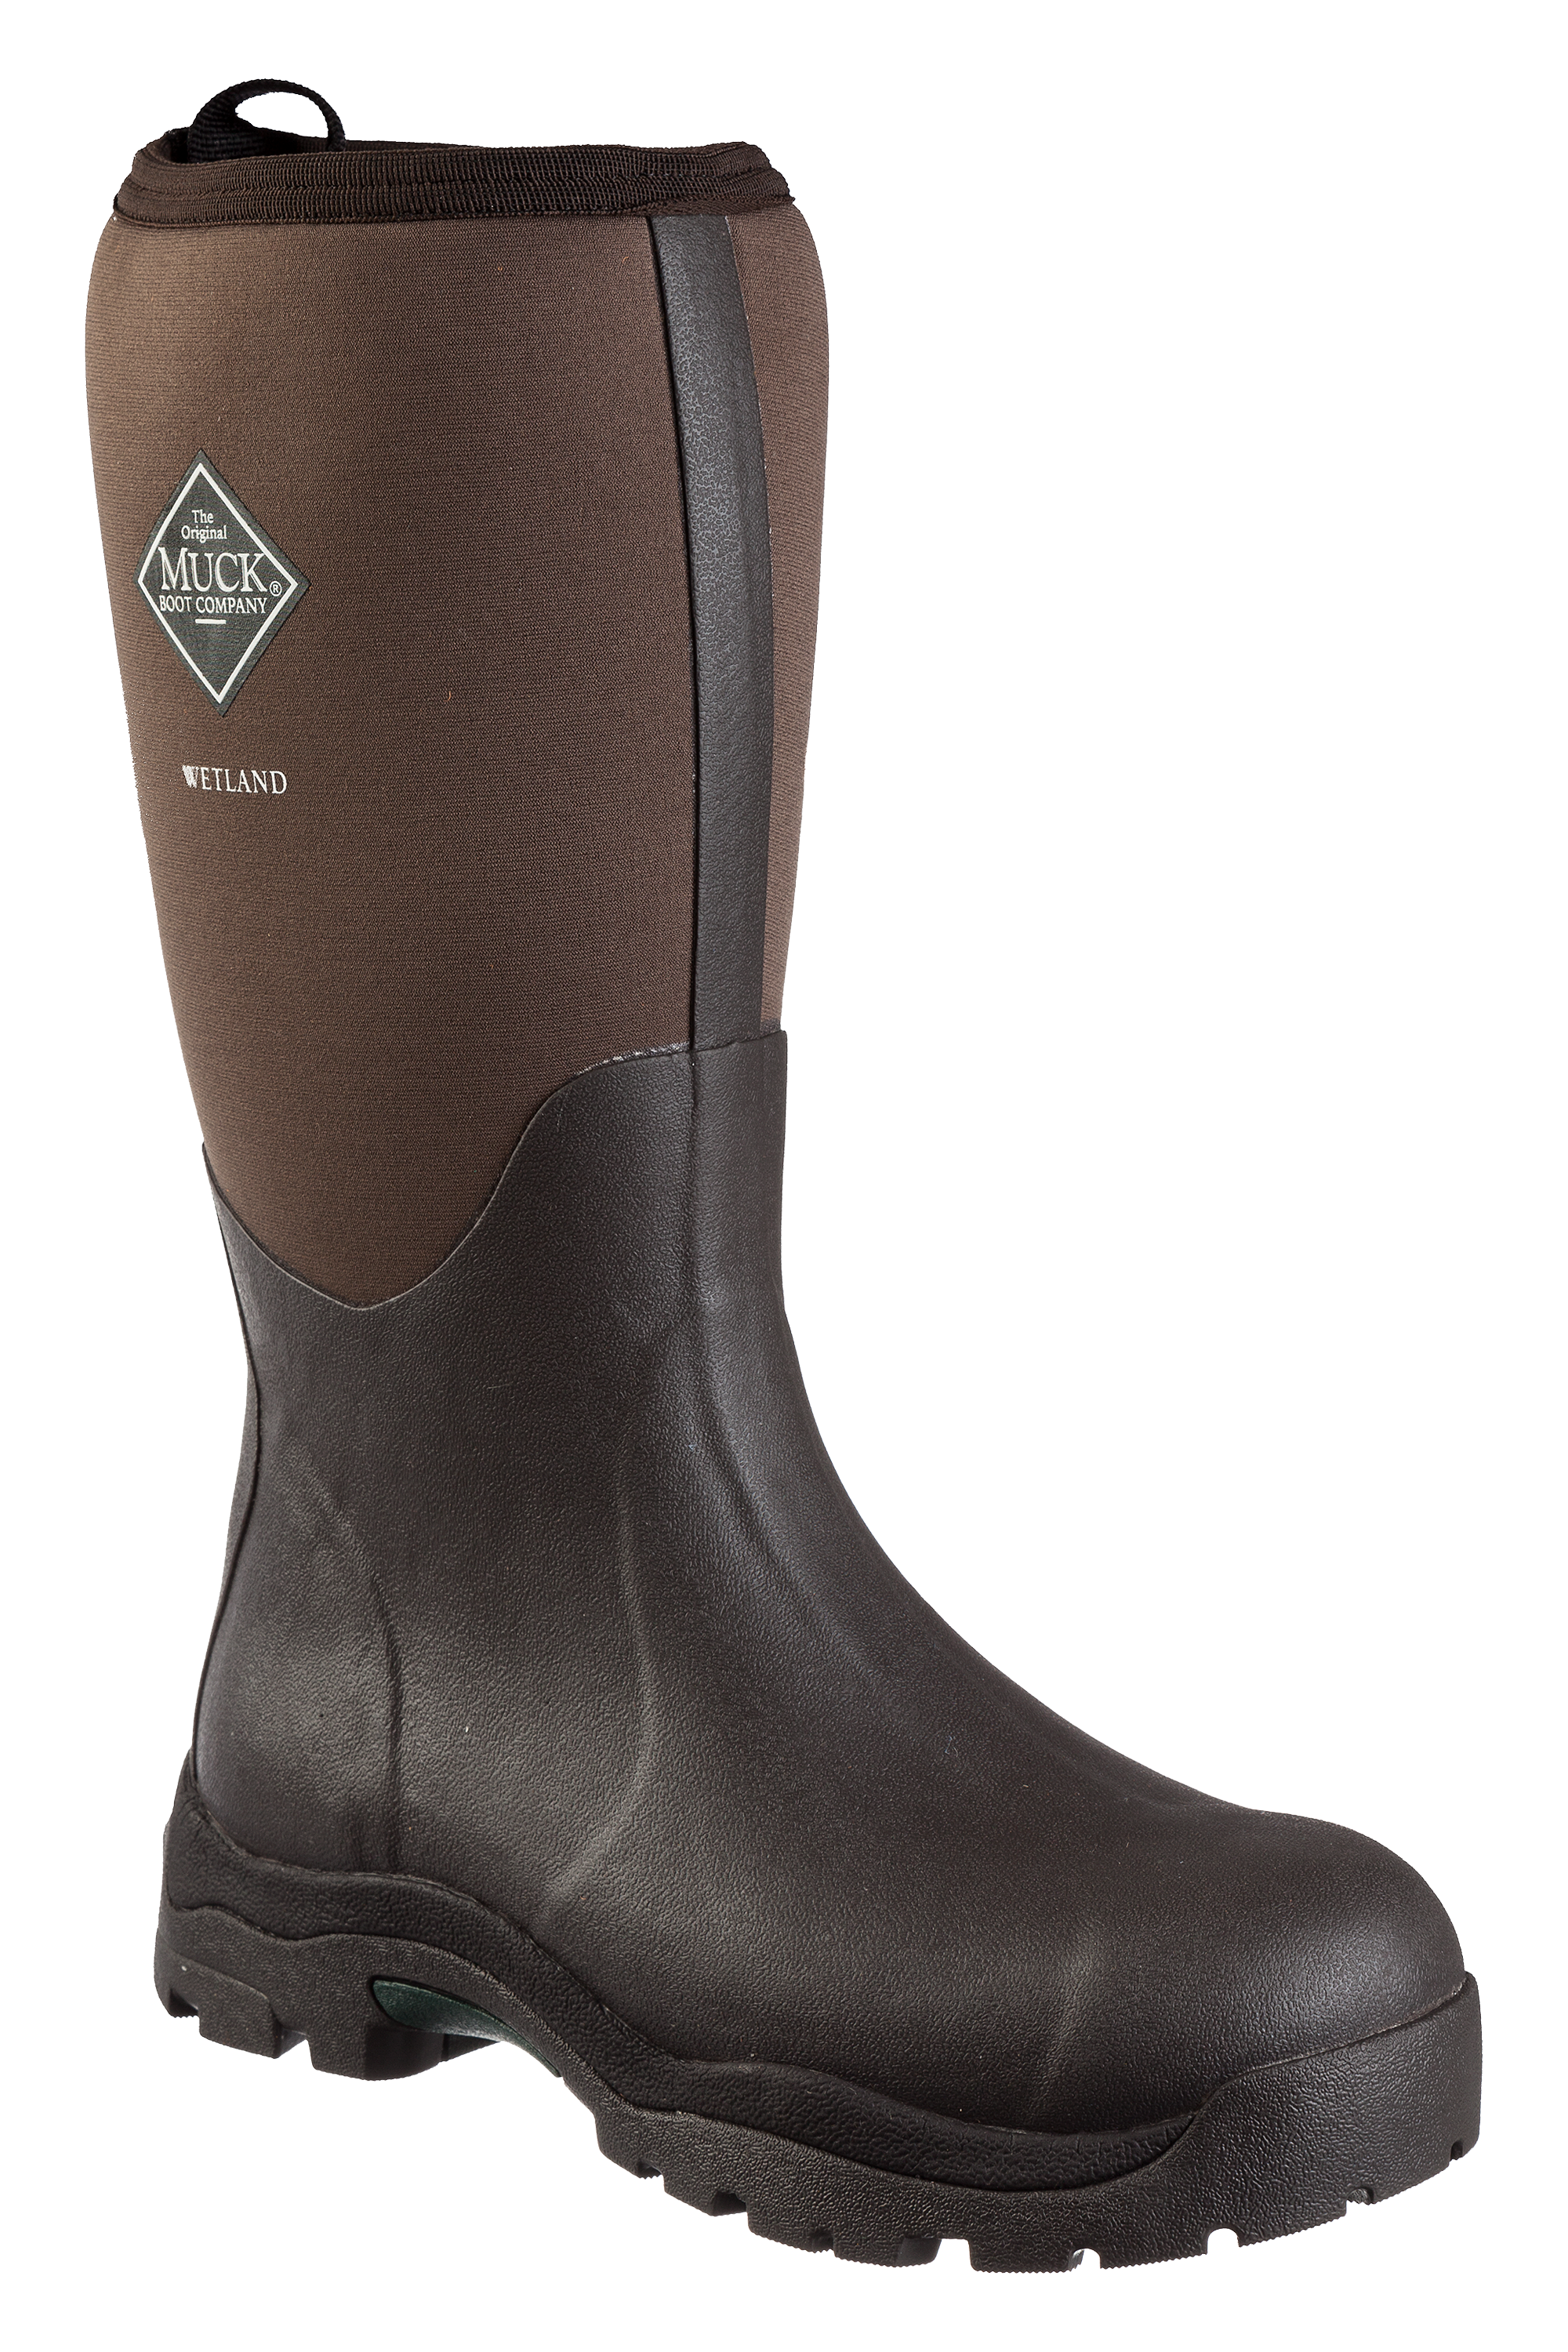 The Original Muck Boot Company Wetland Field Boots for Ladies | Bass ...